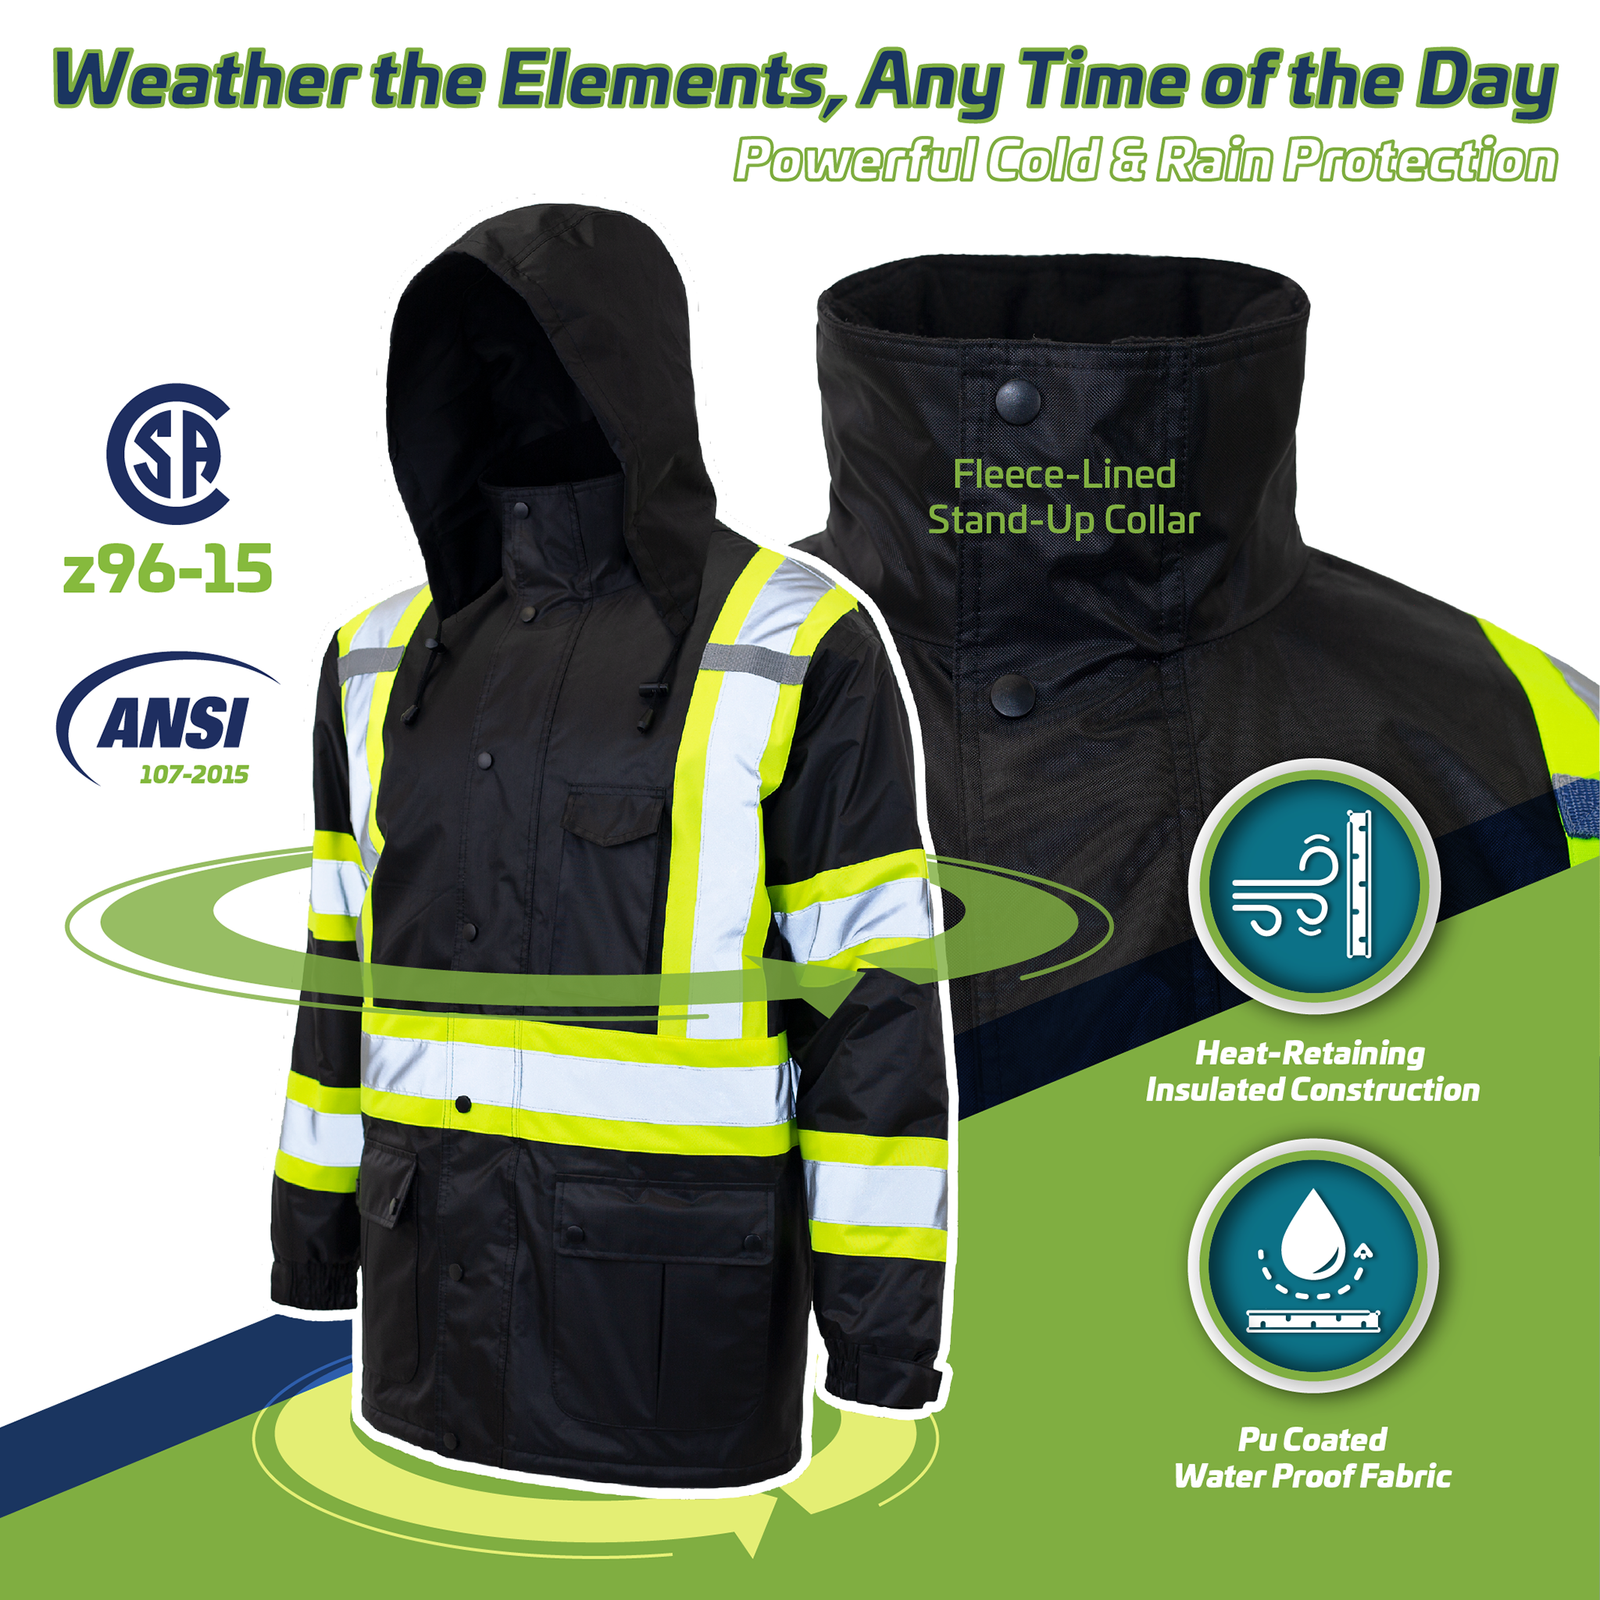 ANSI and CSA compliant Hi vis safety parka jacket color black. Text reads: fleece lined stand collar, for powerful cold and rain protection, heat retaining insulated construction and PU coated